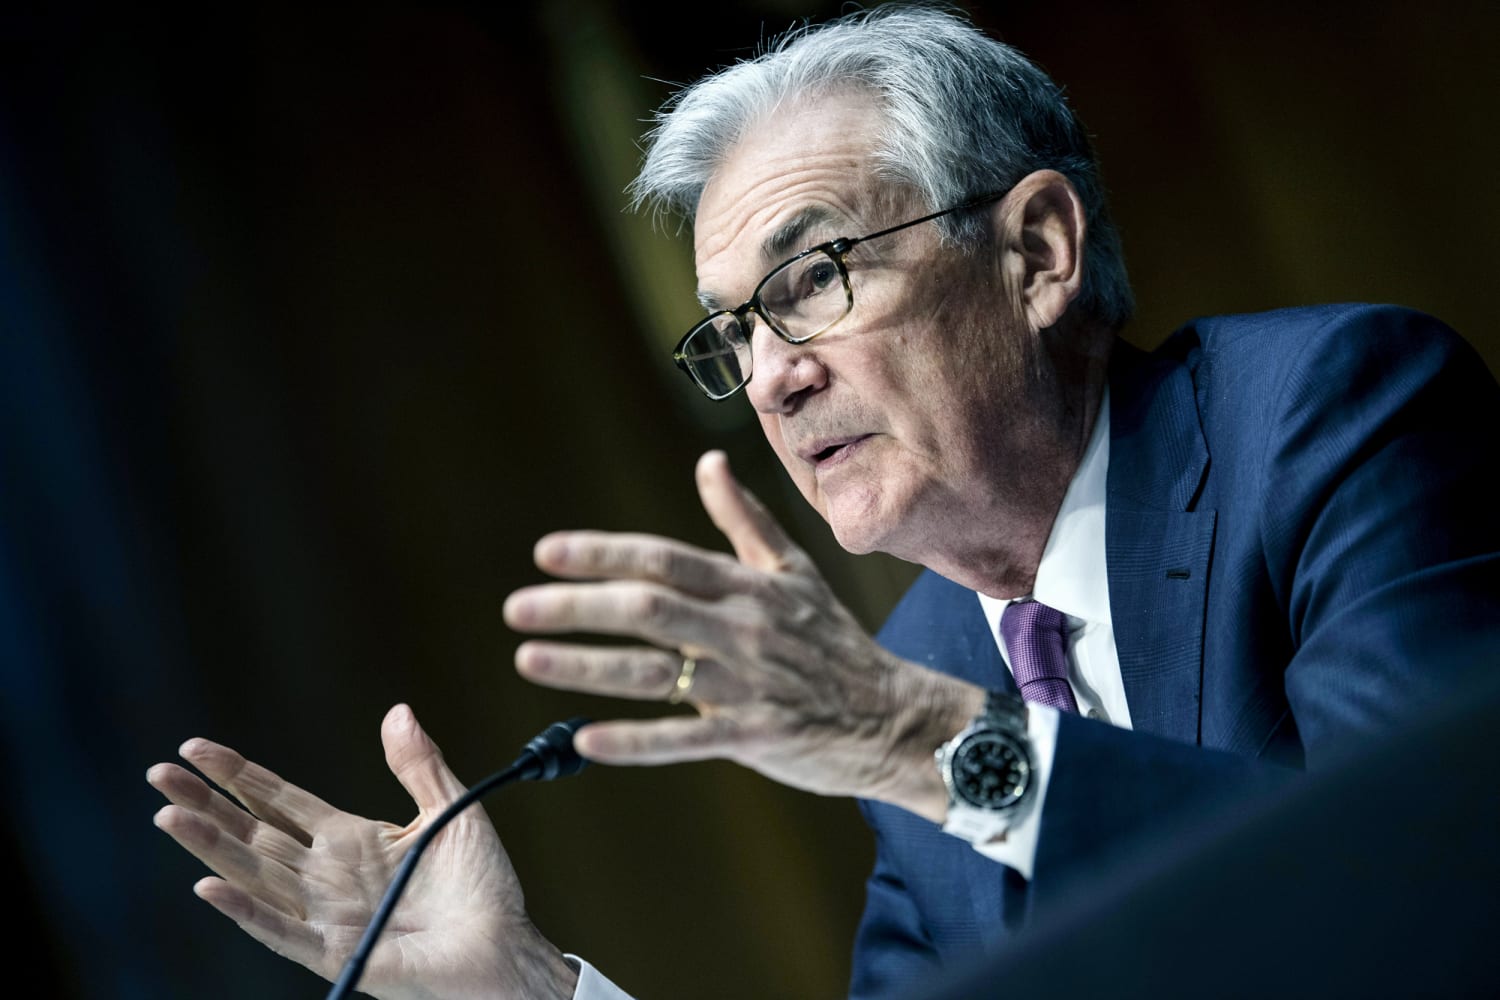 federal reserve chair jerome powell sees inflation battle lasting 'some time,' warns of economic pain